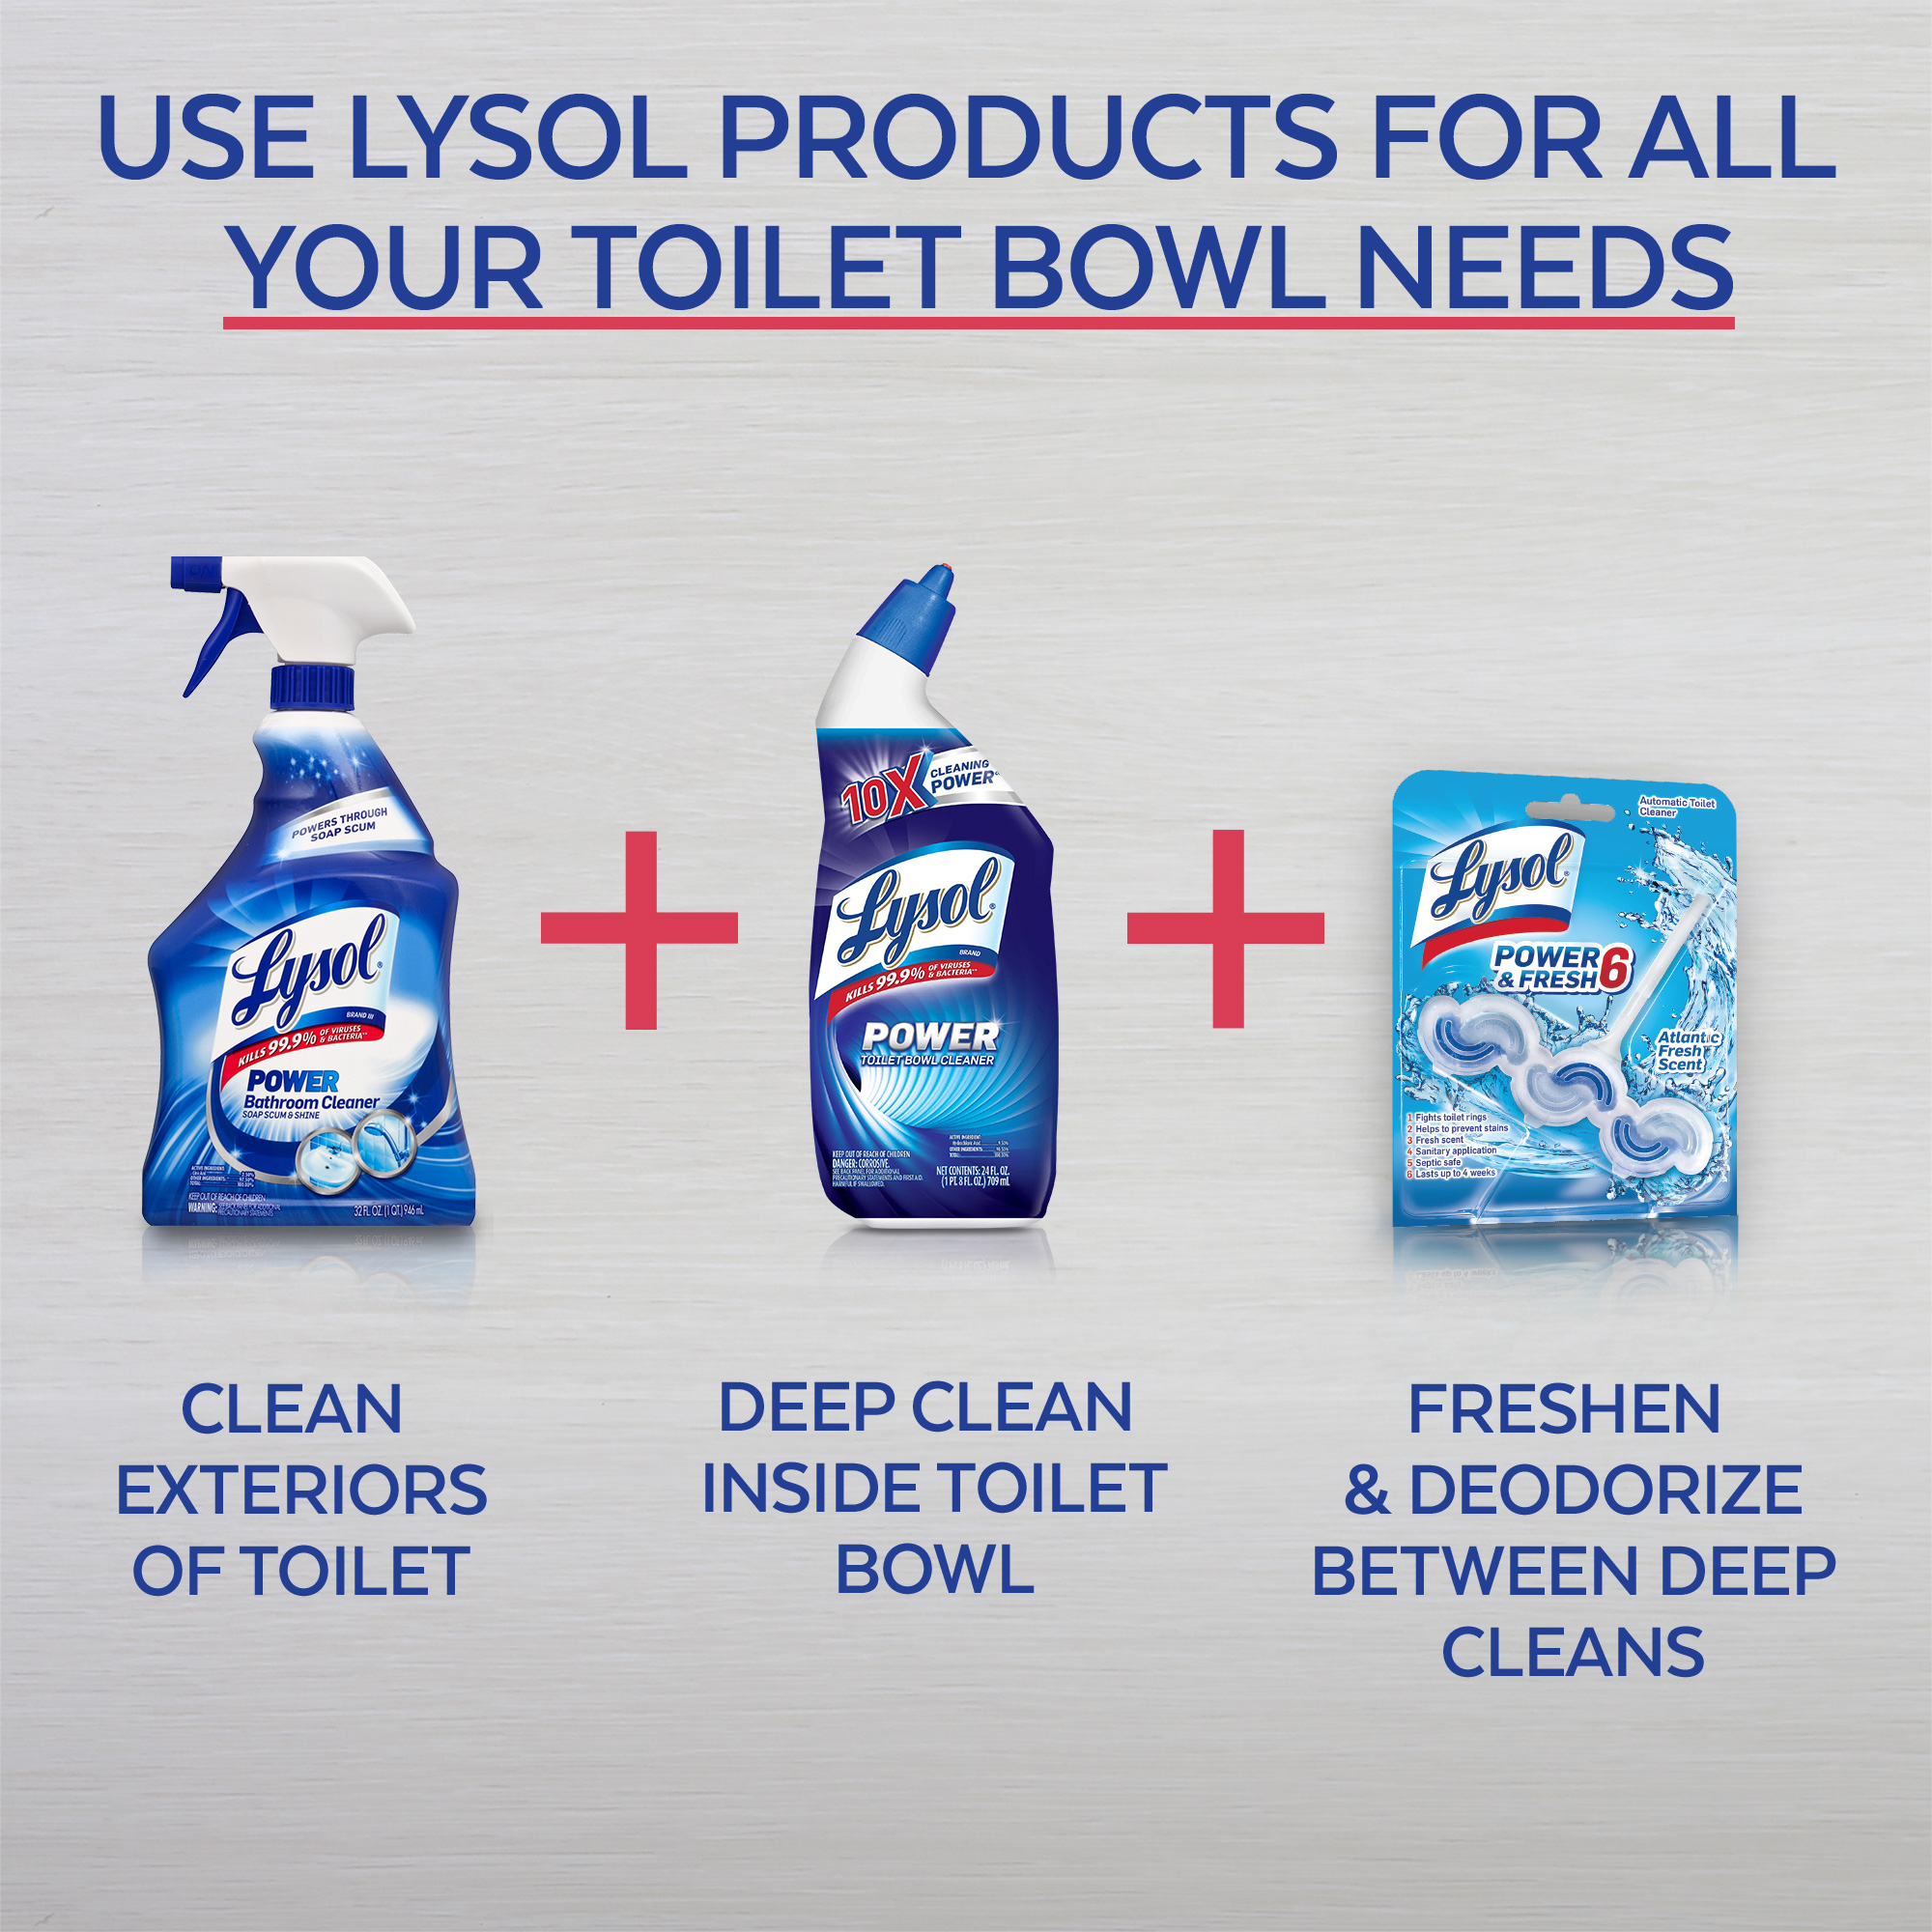 Lysol Power Toilet Bowl Cleaner Gel, For Cleaning and Disinfecting, Stain Removal, 24oz (Pack of 2) - image 5 of 6